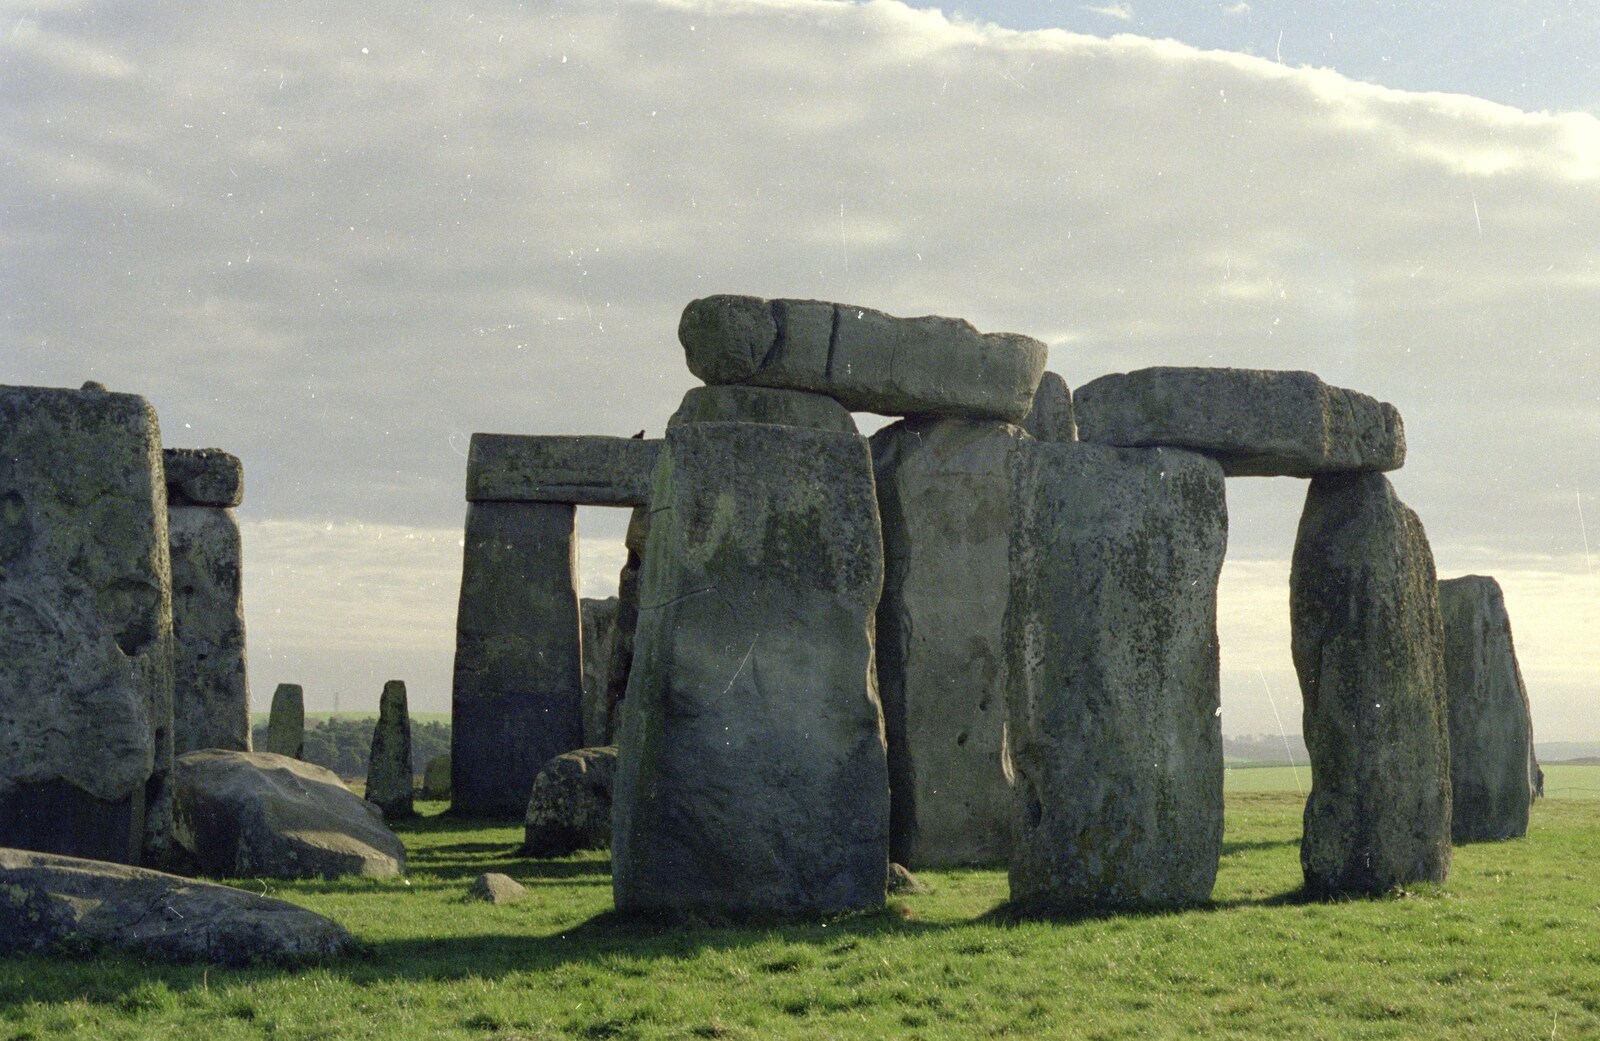 The sarsens and lintels of Stonehenge from A Walk in the New Forest, Hampshire - 27th July 1989